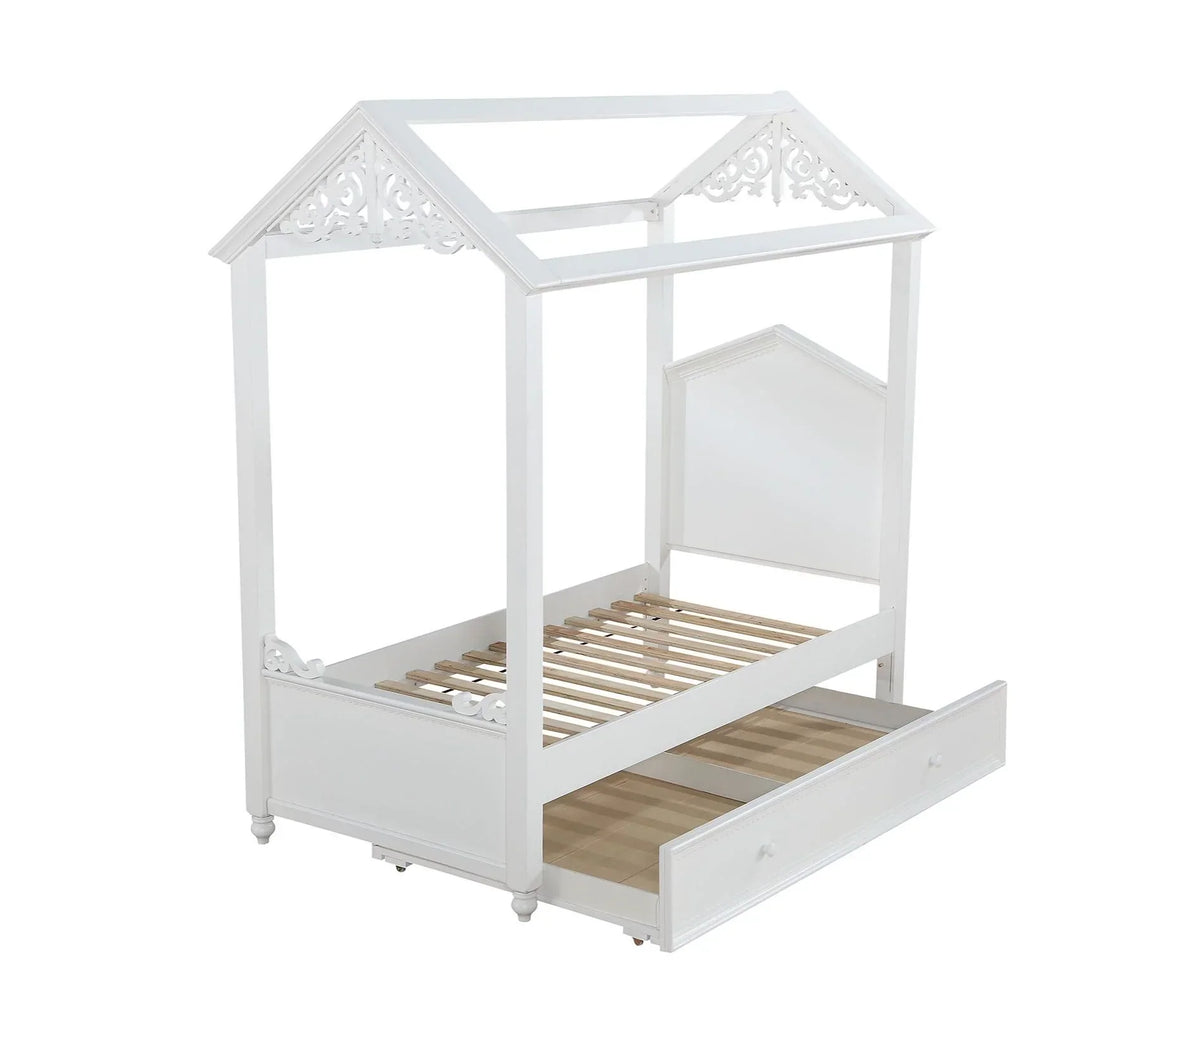 Rapunzel White Twin Bed Model 37350T By ACME Furniture